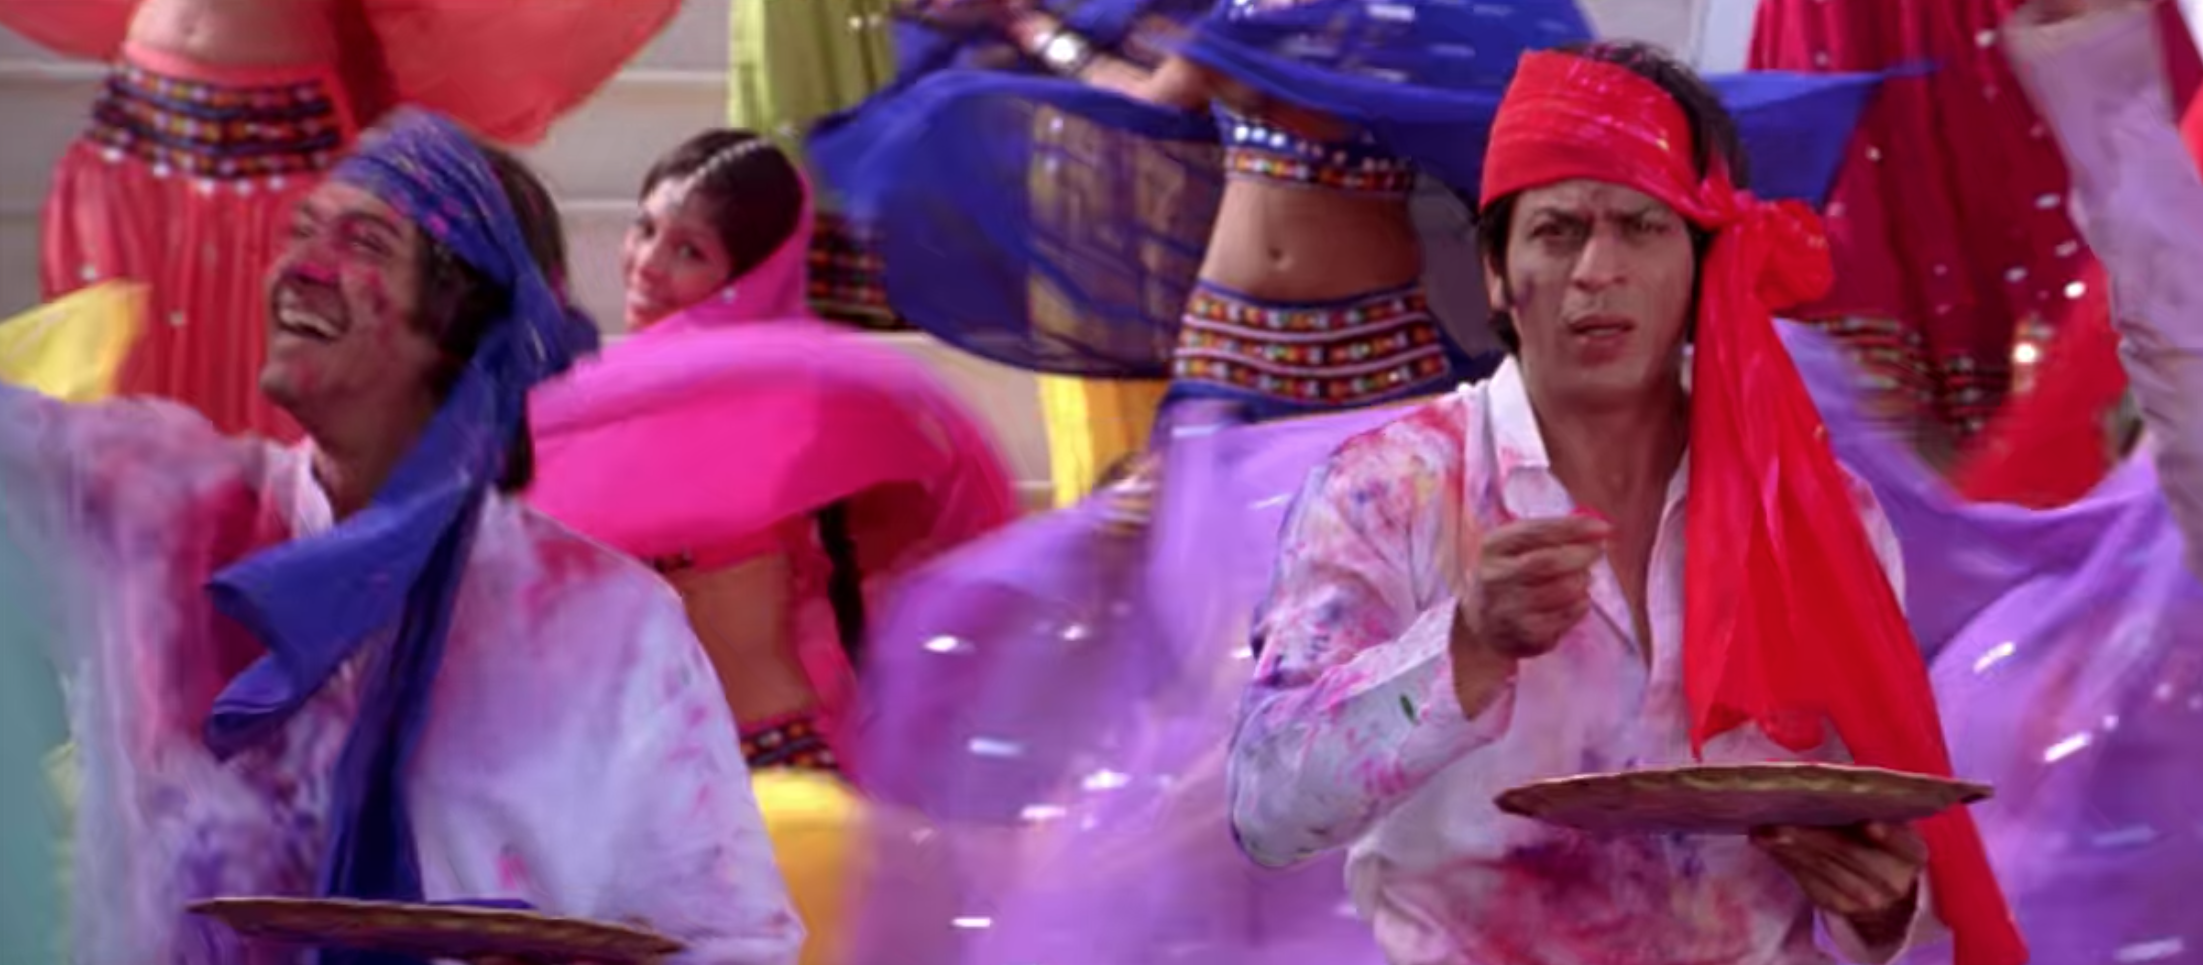 Om, wearing a white shirt and red head scarf, throws colorful dust into the air as women dance behind him.